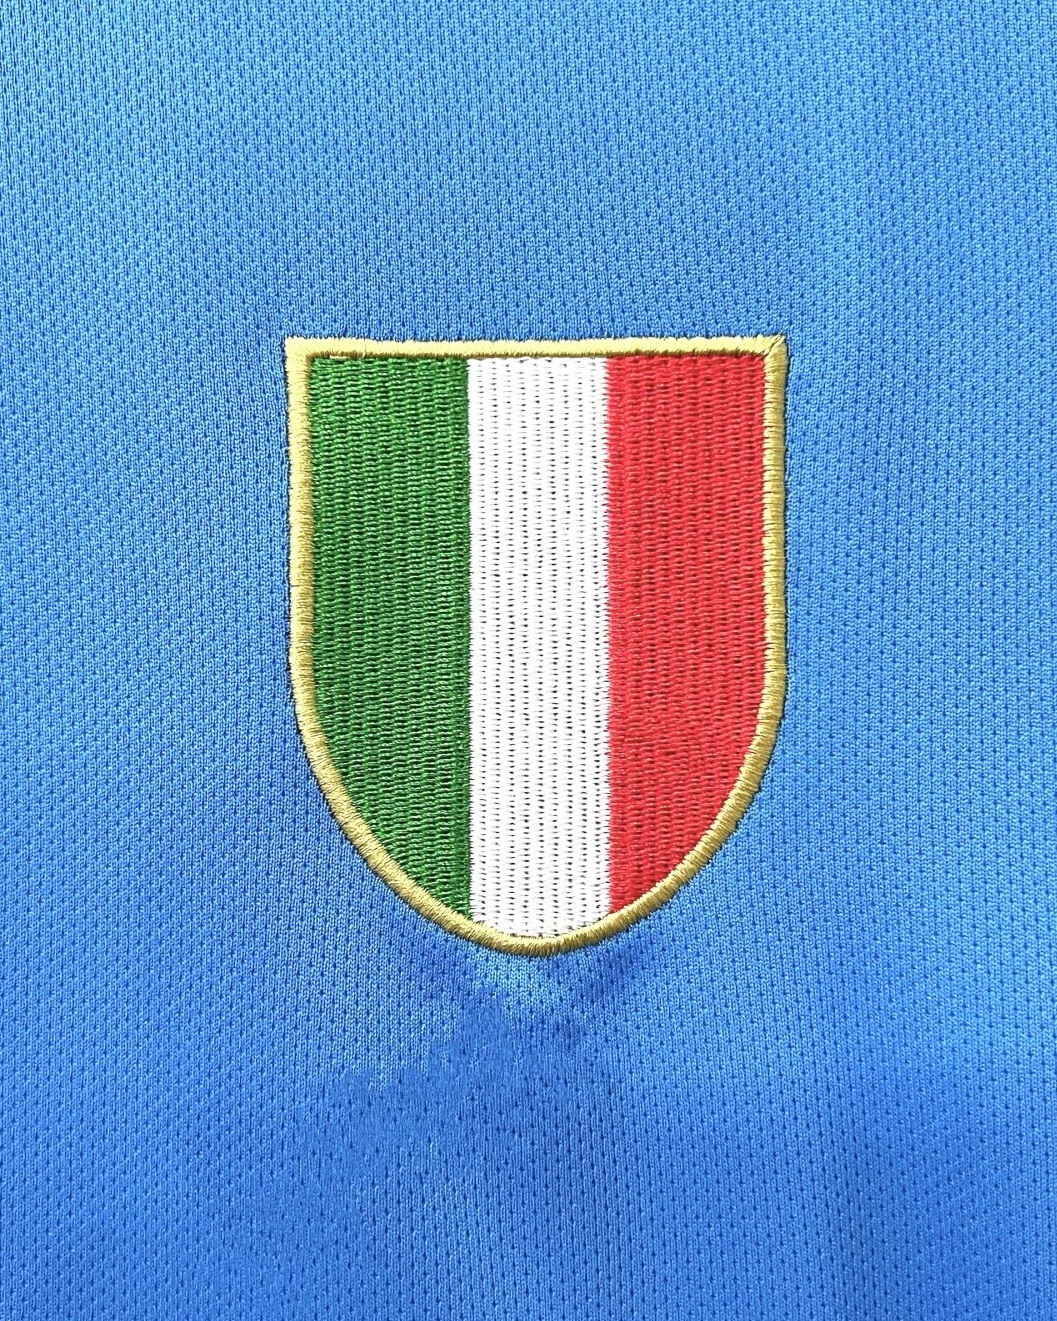 Napoli 1987/88 Home Soccer Jersey